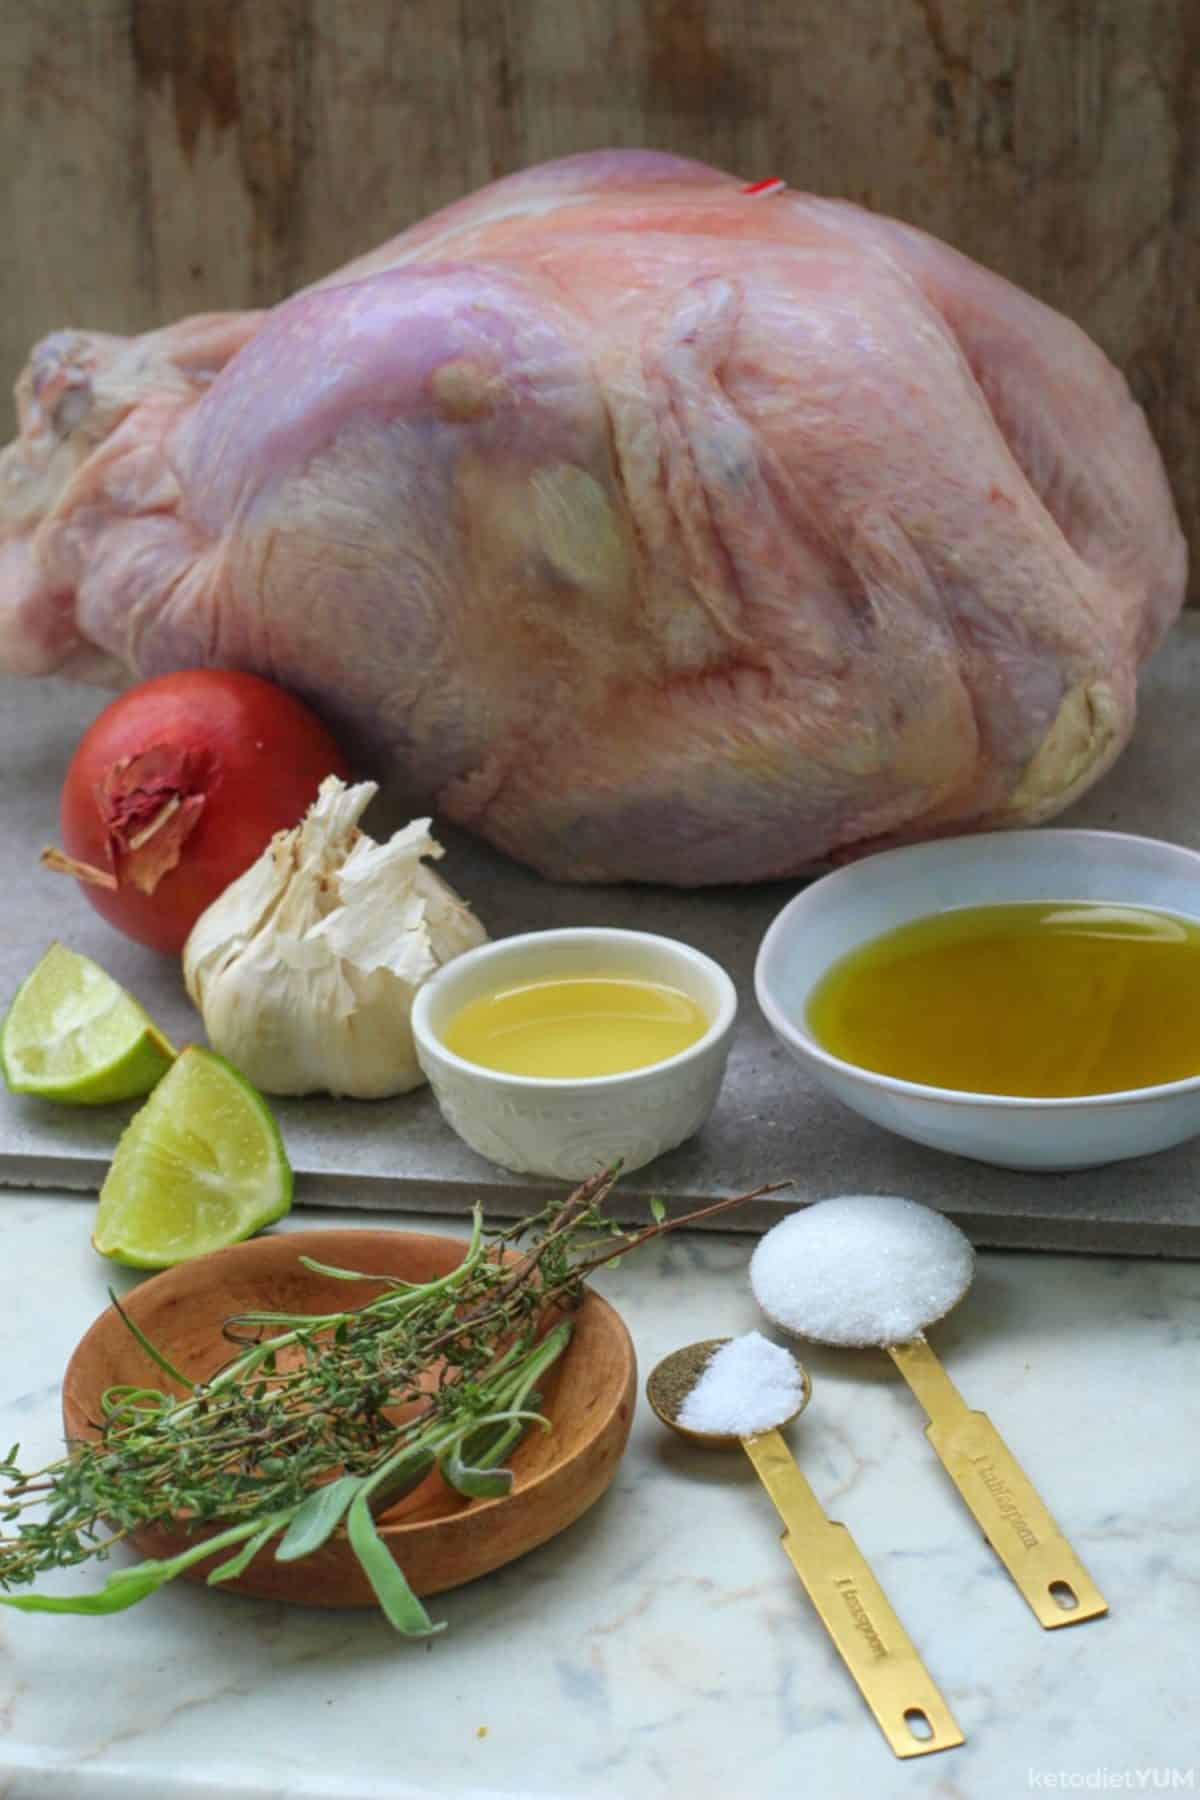 Raw turkey and all the ingredients you'll need to make a delicious Thanksgiving dinner